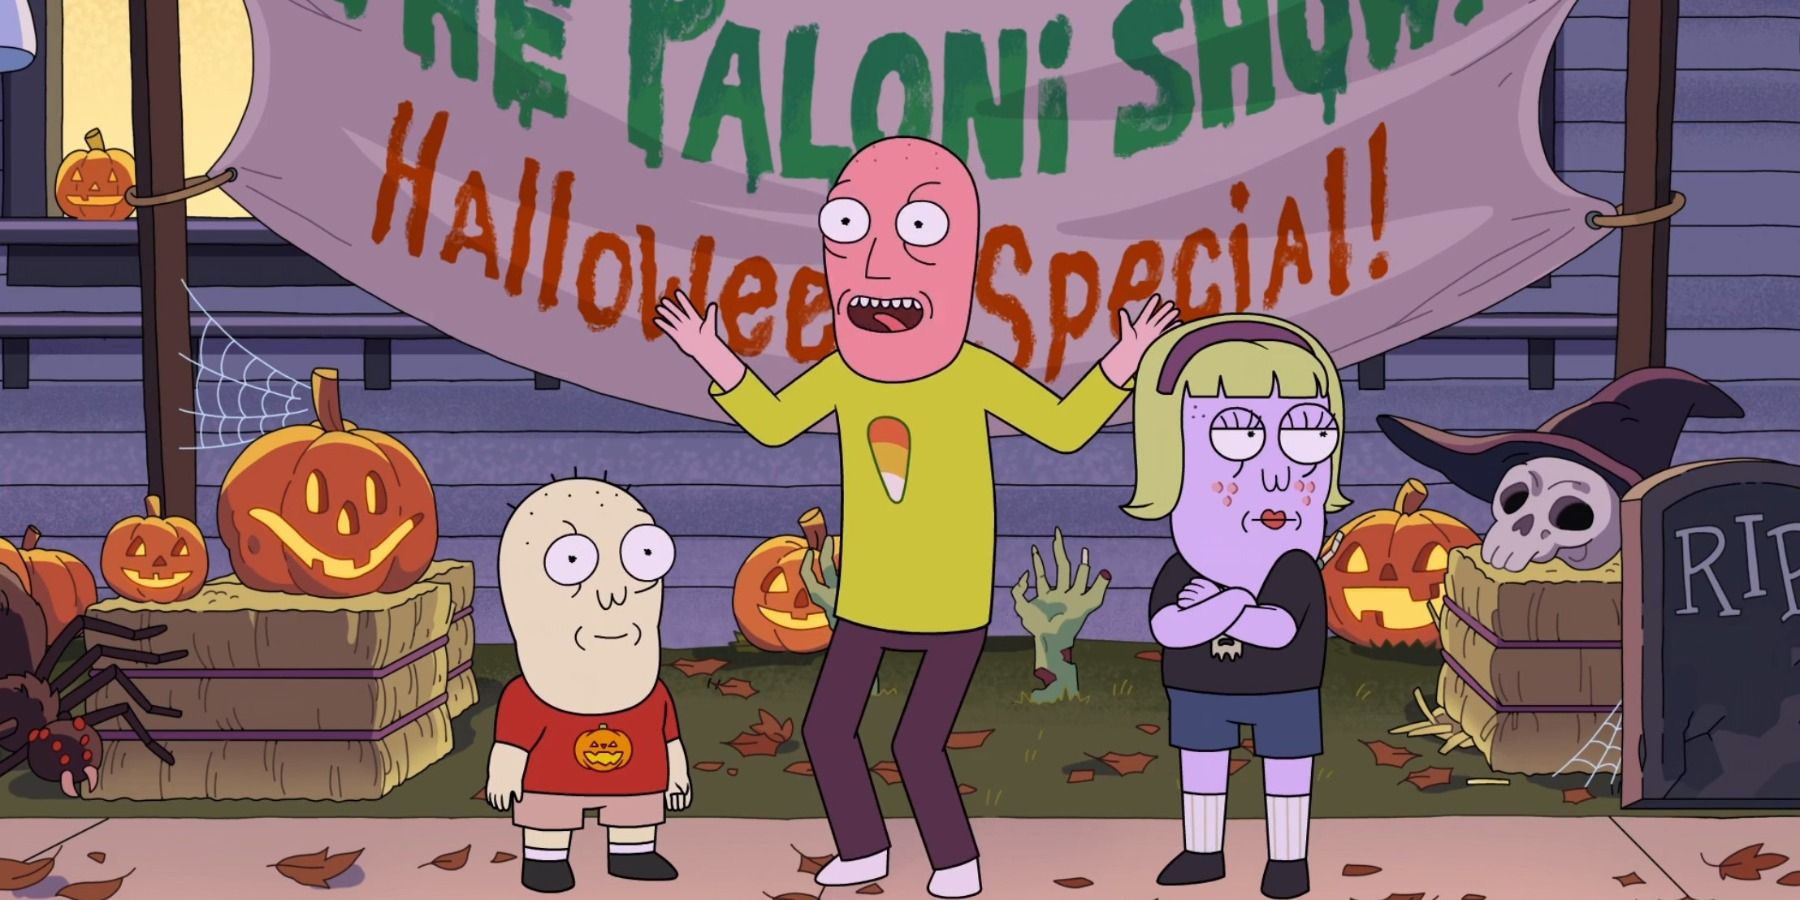 Justin Roiland's The Paloni show! Halloween Special Hulu